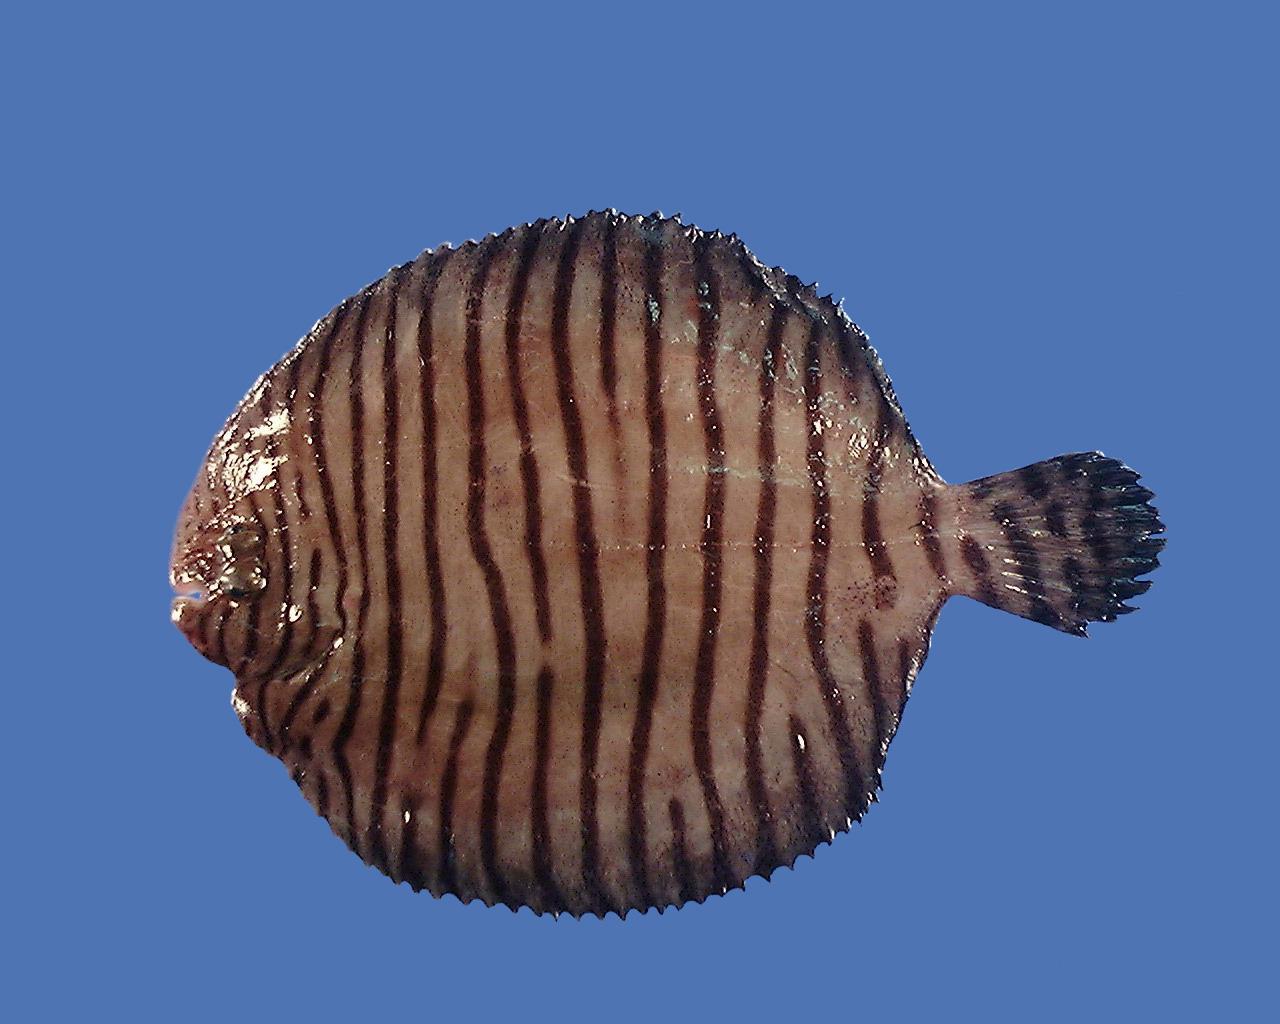 a small brown fish with black stripes swimming